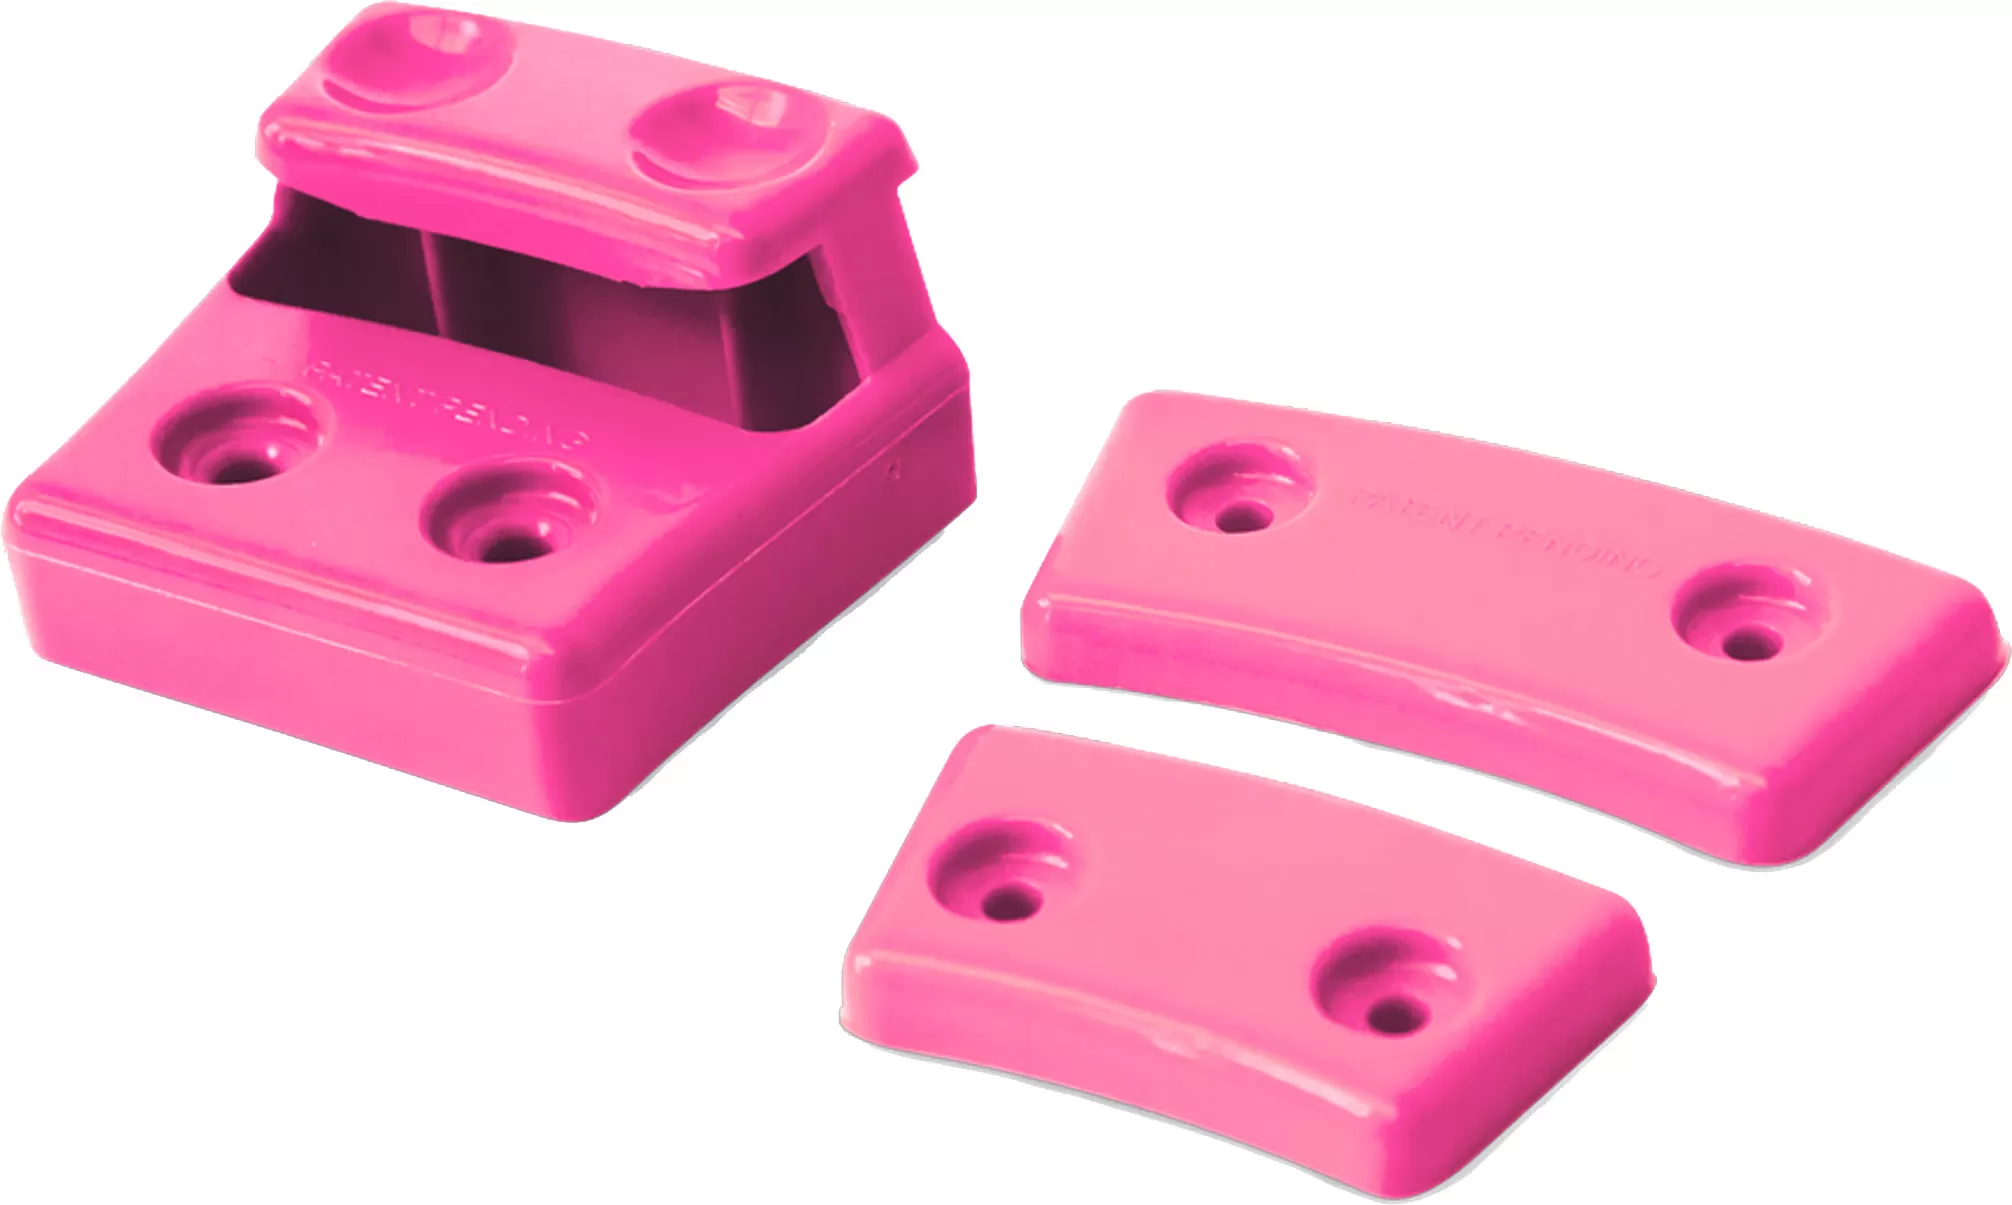 Daystar Cam Can Colored Replacement Cams Fluorescent Pink - KU76148FP